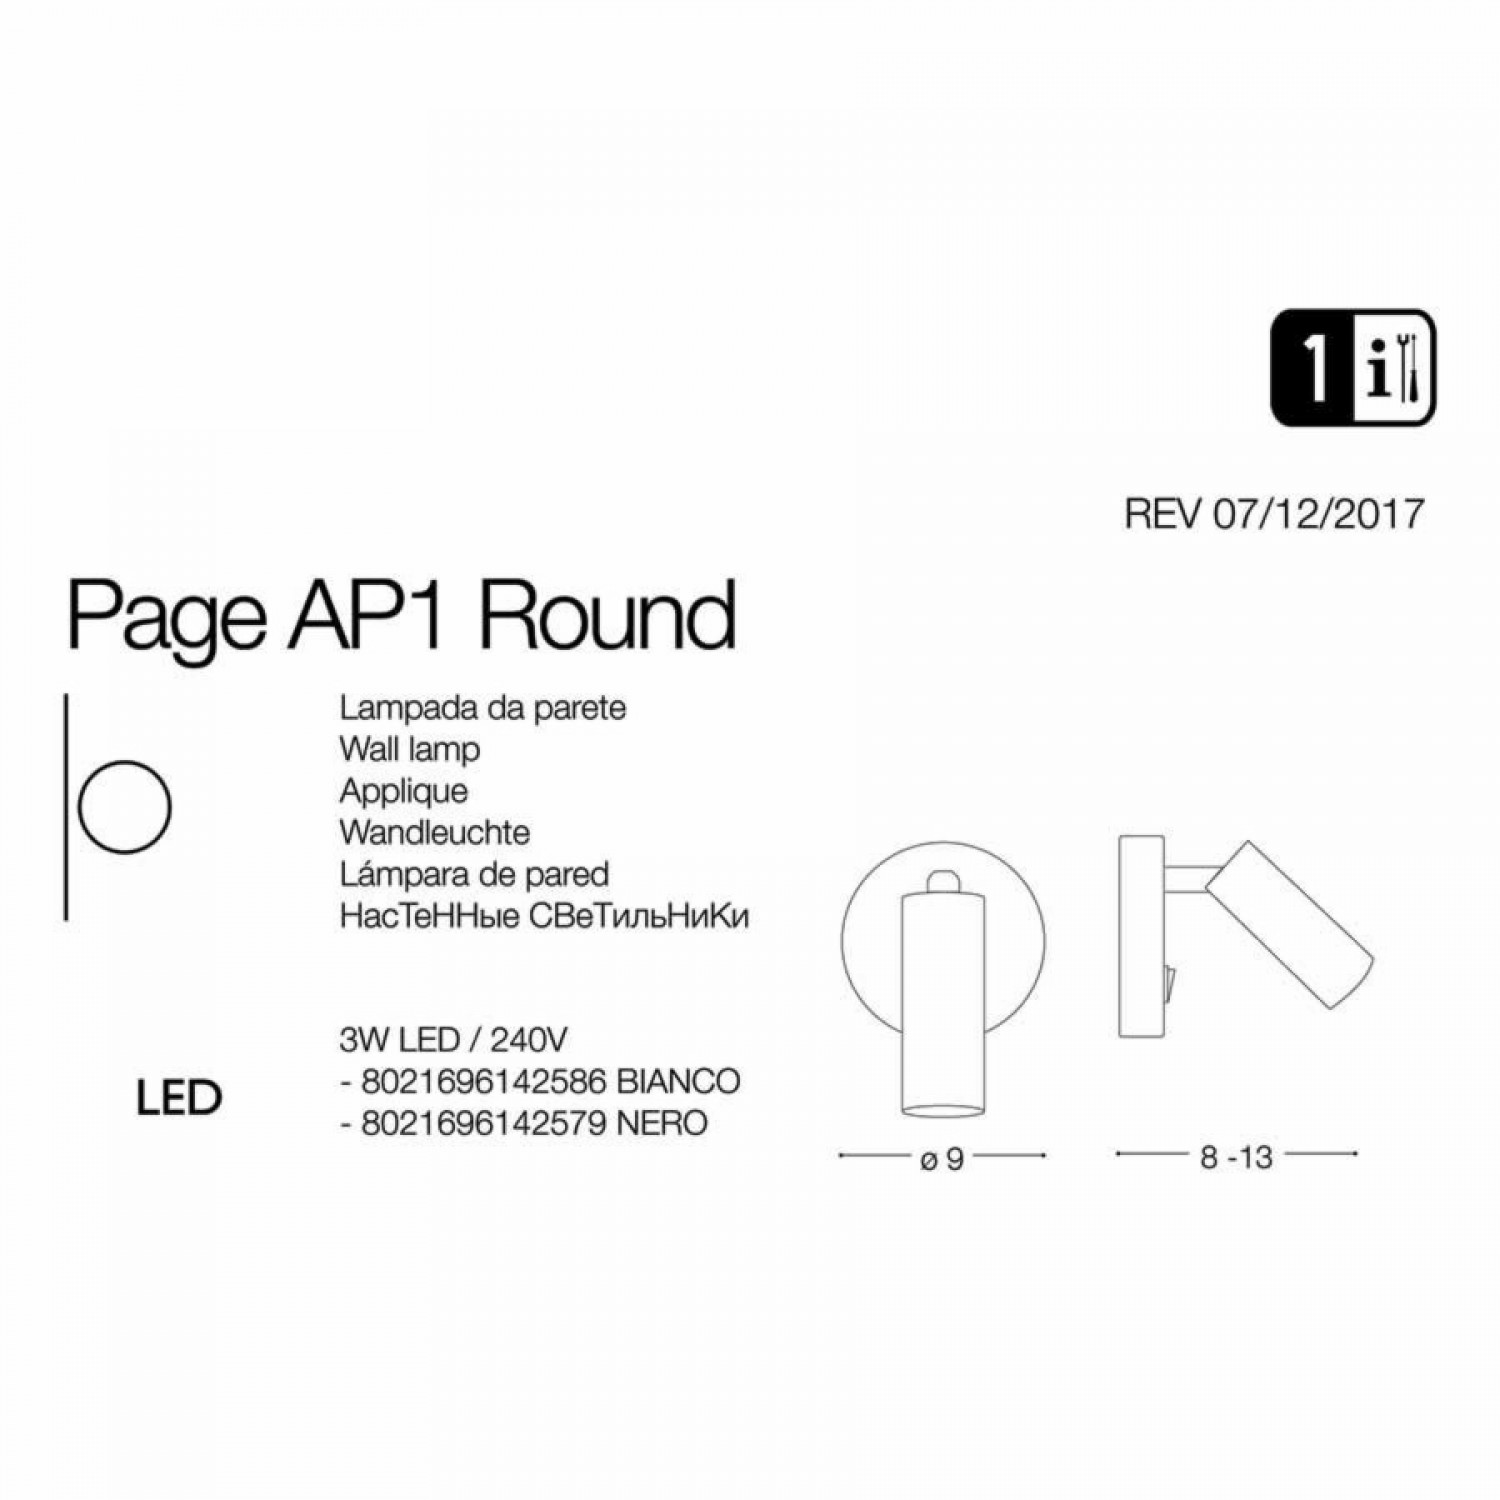 Бра-спот Ideal Lux PAGE AP ROUND BRUNITO 233680